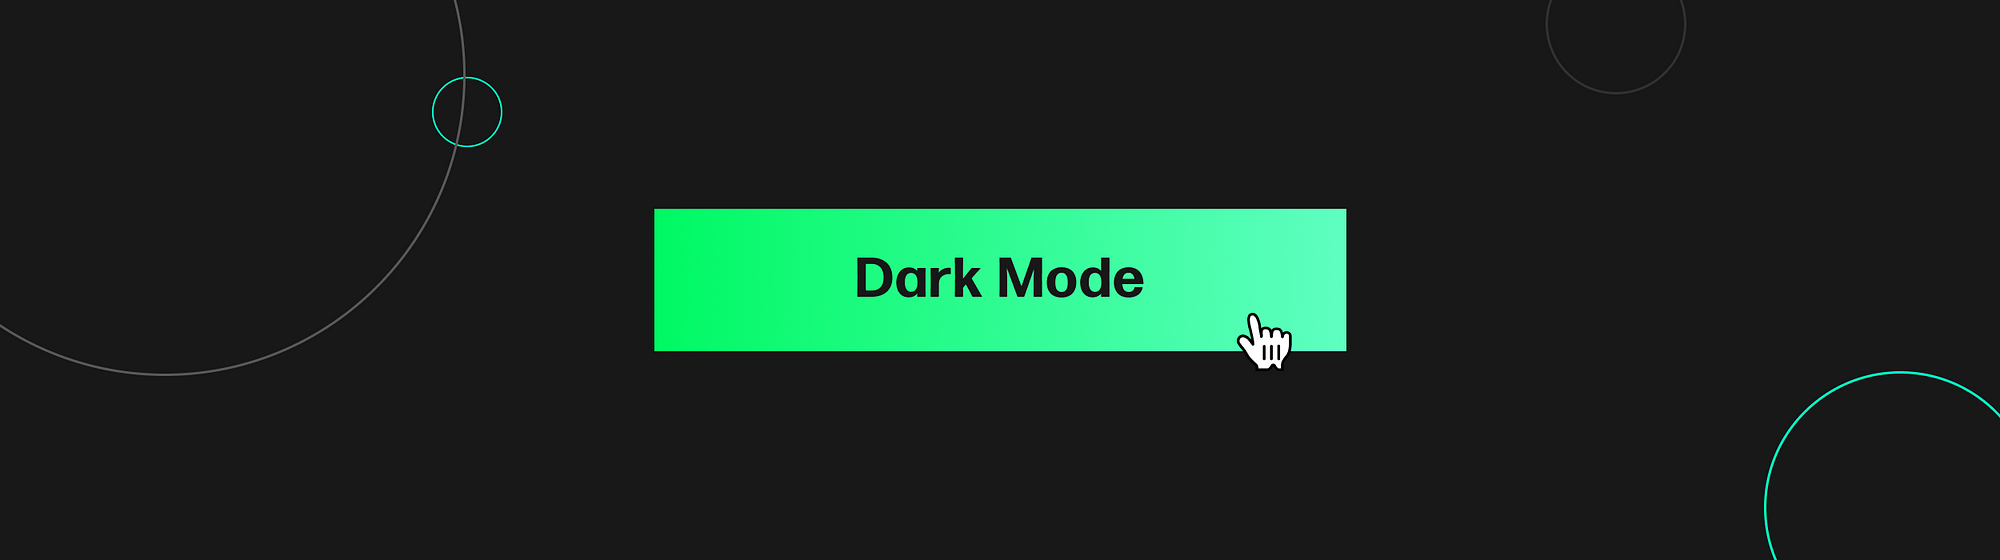 Roblox Dark Mode [How To Turn On Official Dark Theme]